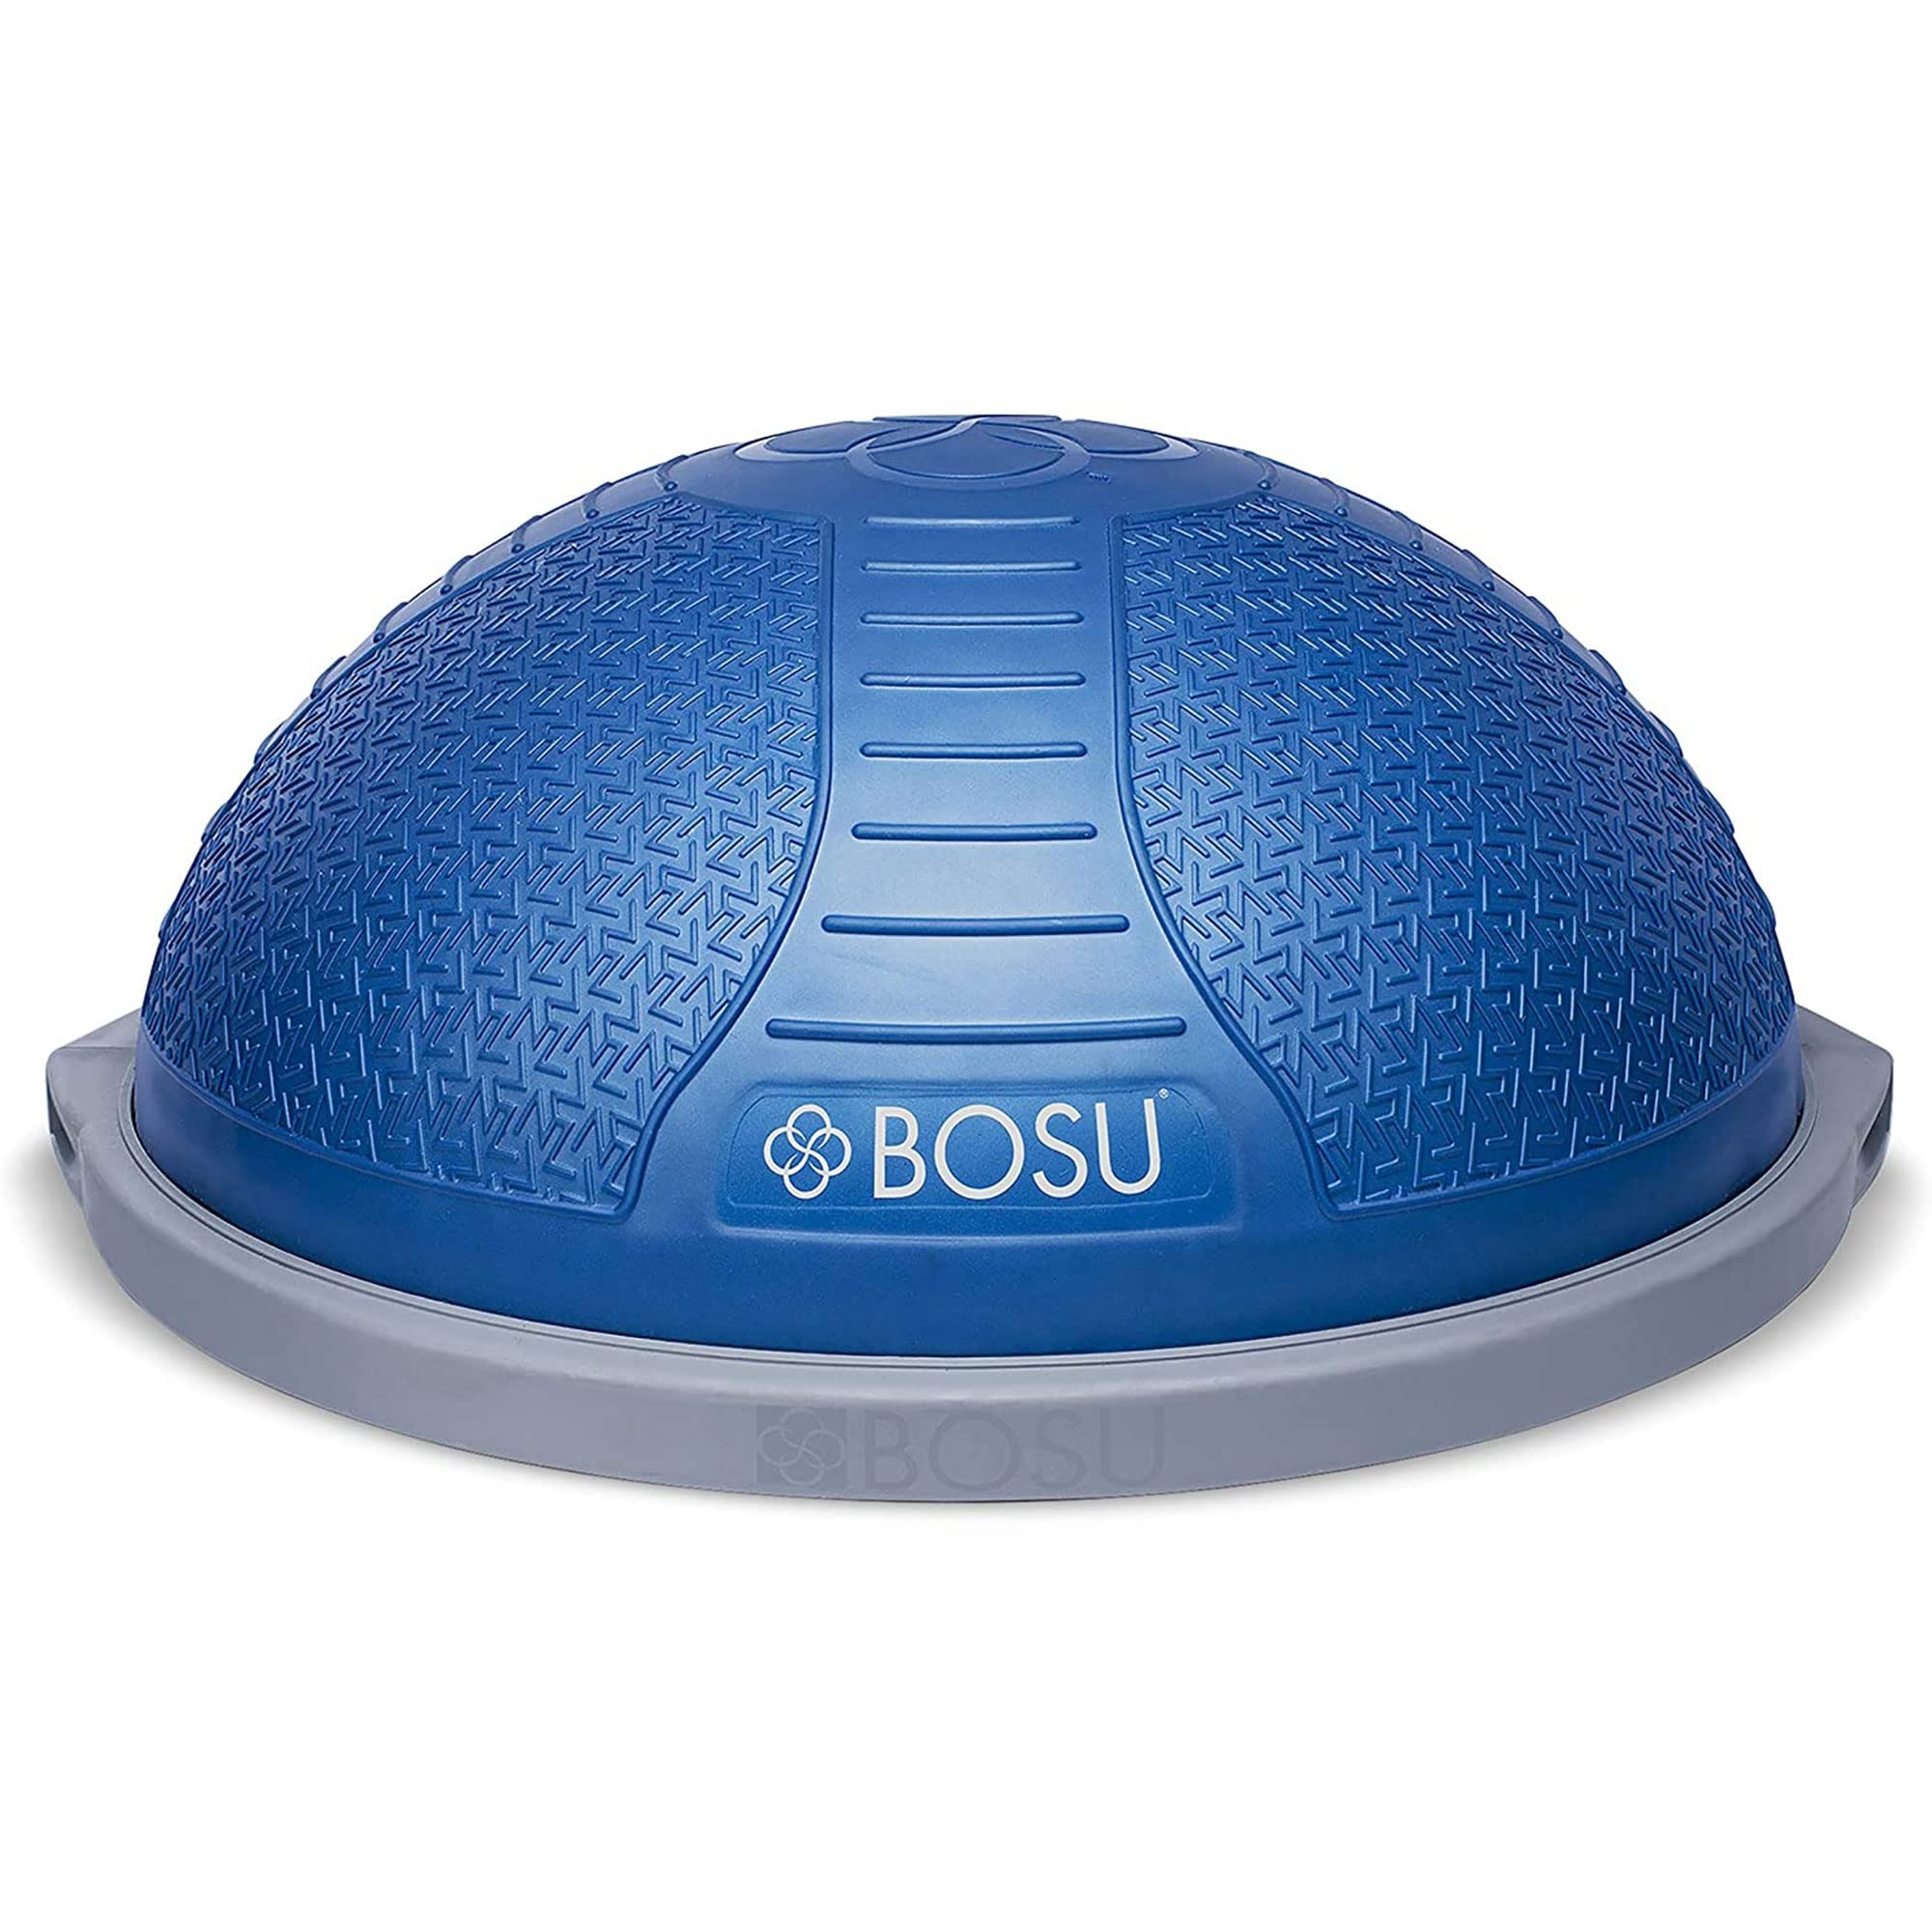 BOSU NexGen 25IN Home Fitness Exercise Gym Strength Flexibility Balance Trainer with Rubberized Non Skid Surface and Hand Air Pump